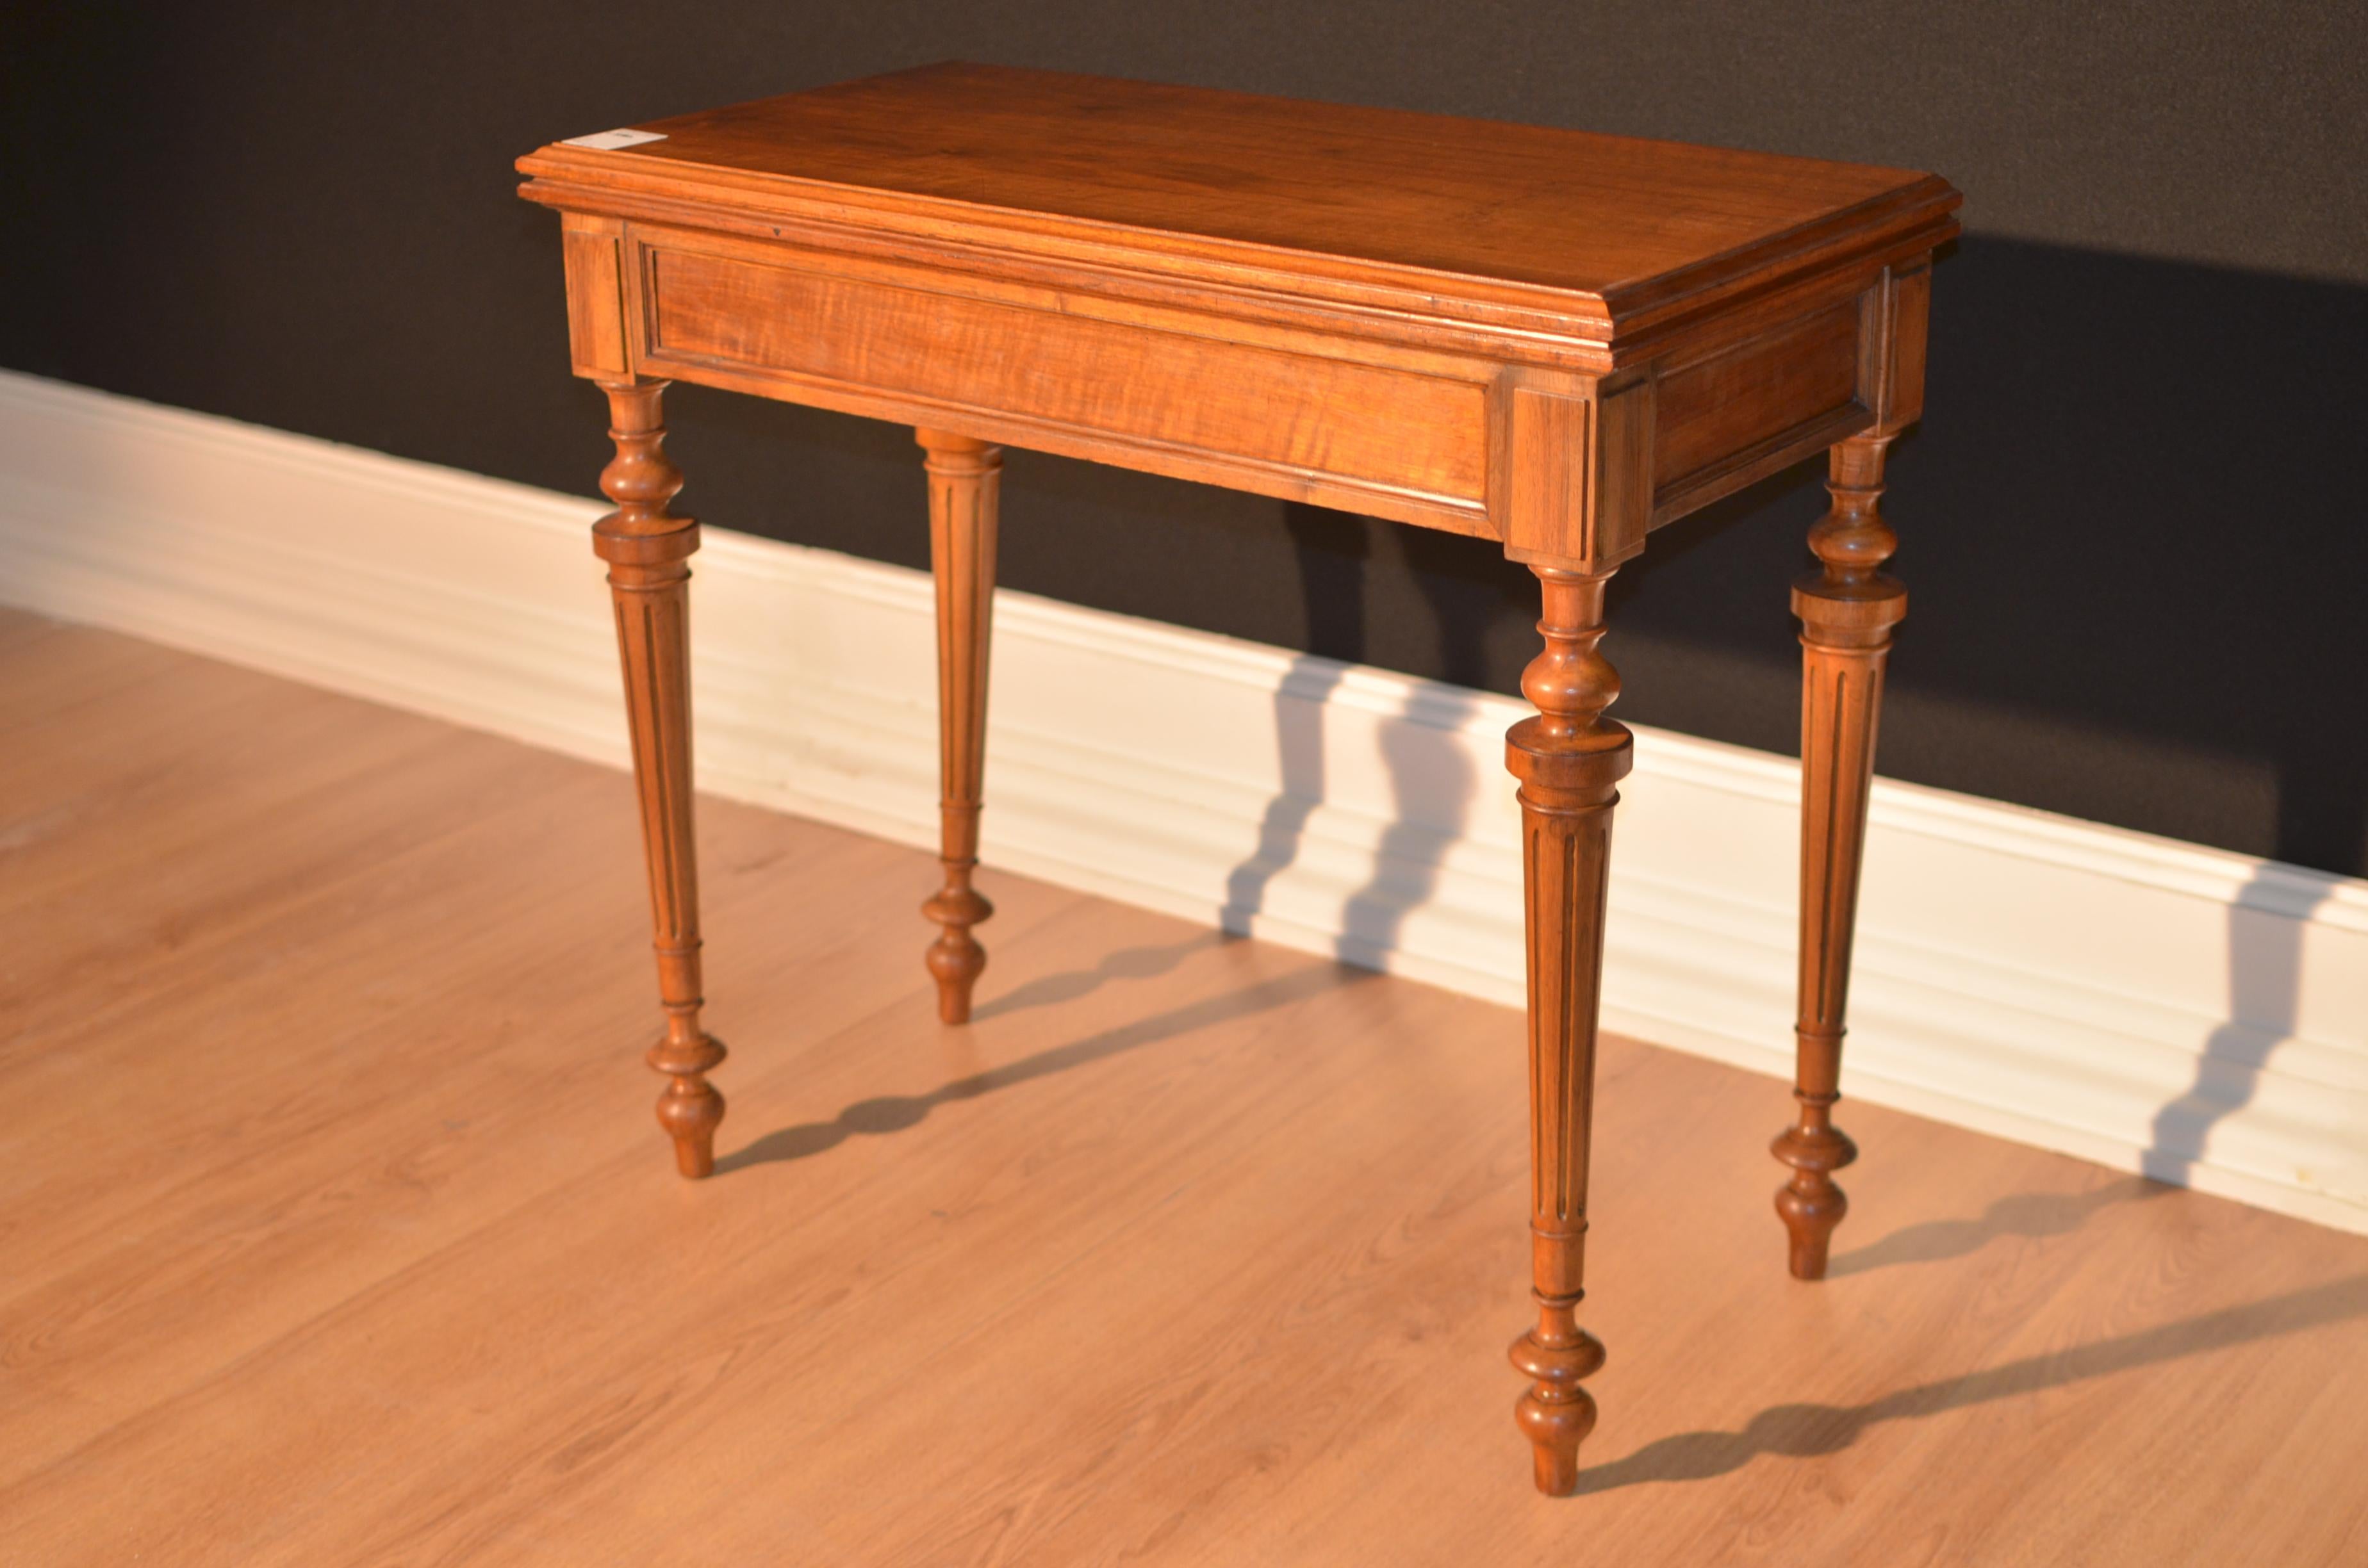 Napoleon III game table entirely in walnut of French origin, circa 1880. The gaming table has recently been restored, so structurally it does not require further intervention but only the replacement of the internal cloth.